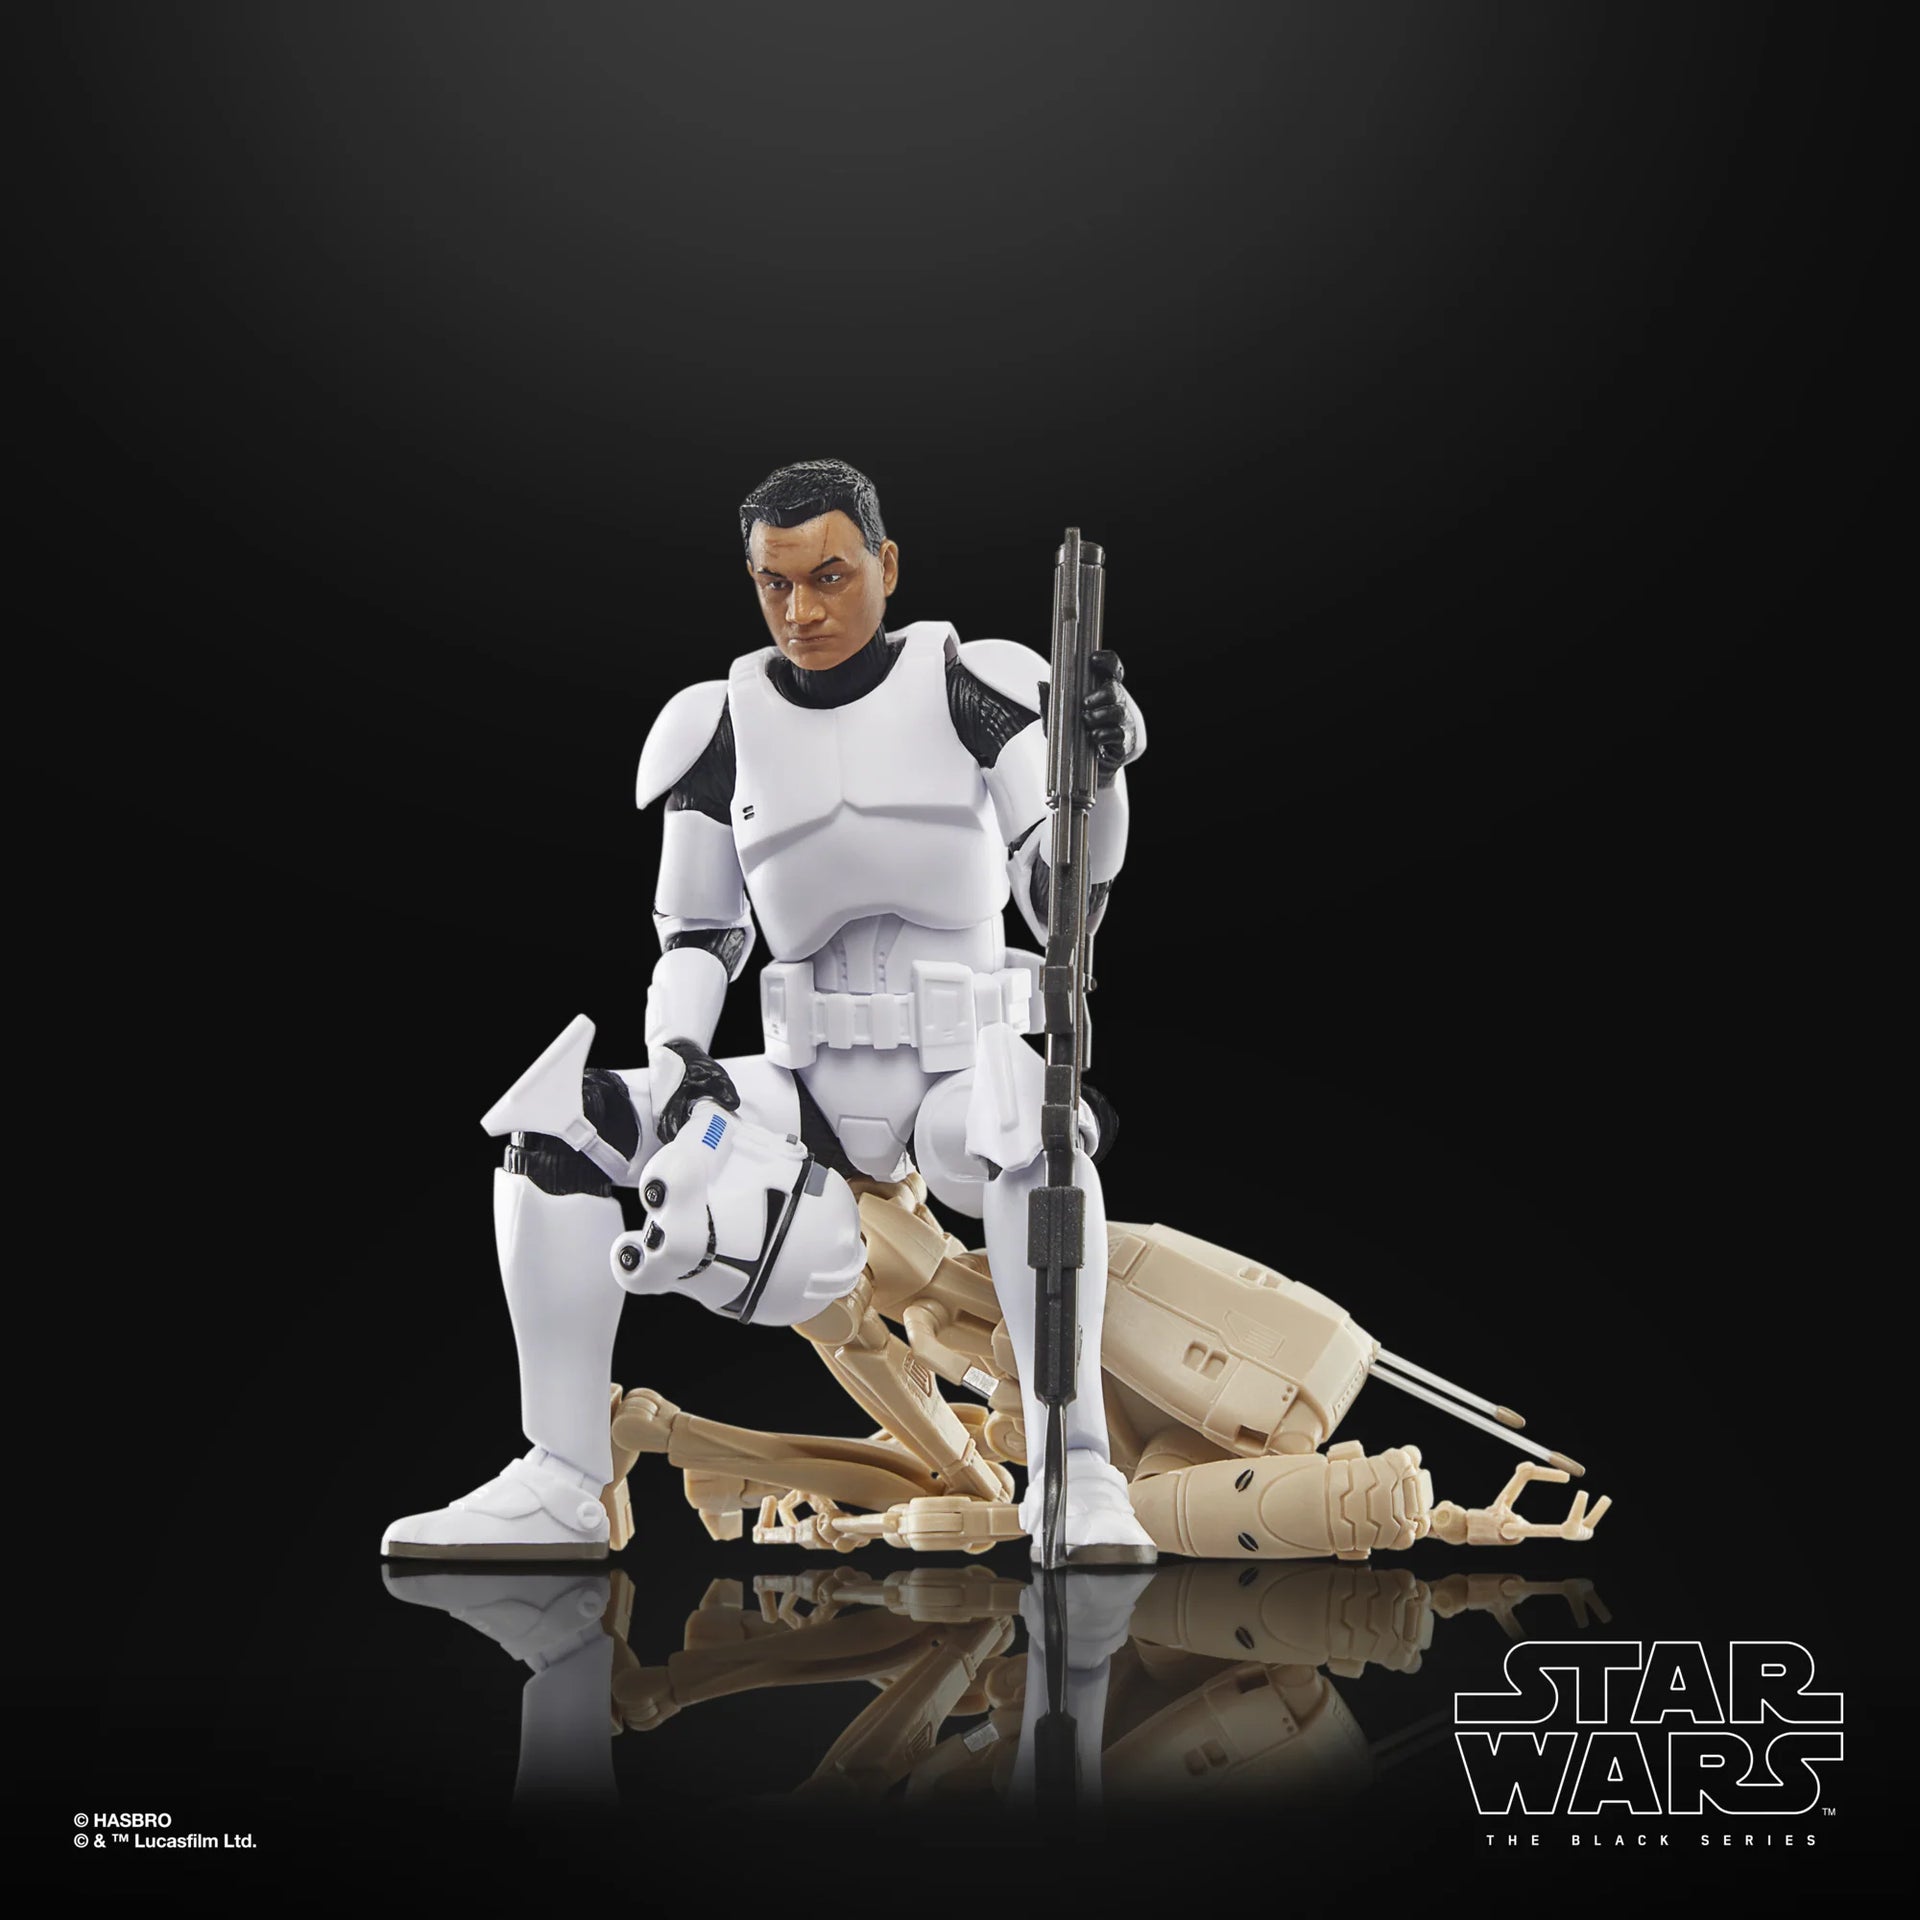 Hasbro Star Wars Black Series Clone Wars Phase II Clone Trooper and Battle Droid Exclusive 6 Inch Action Figure